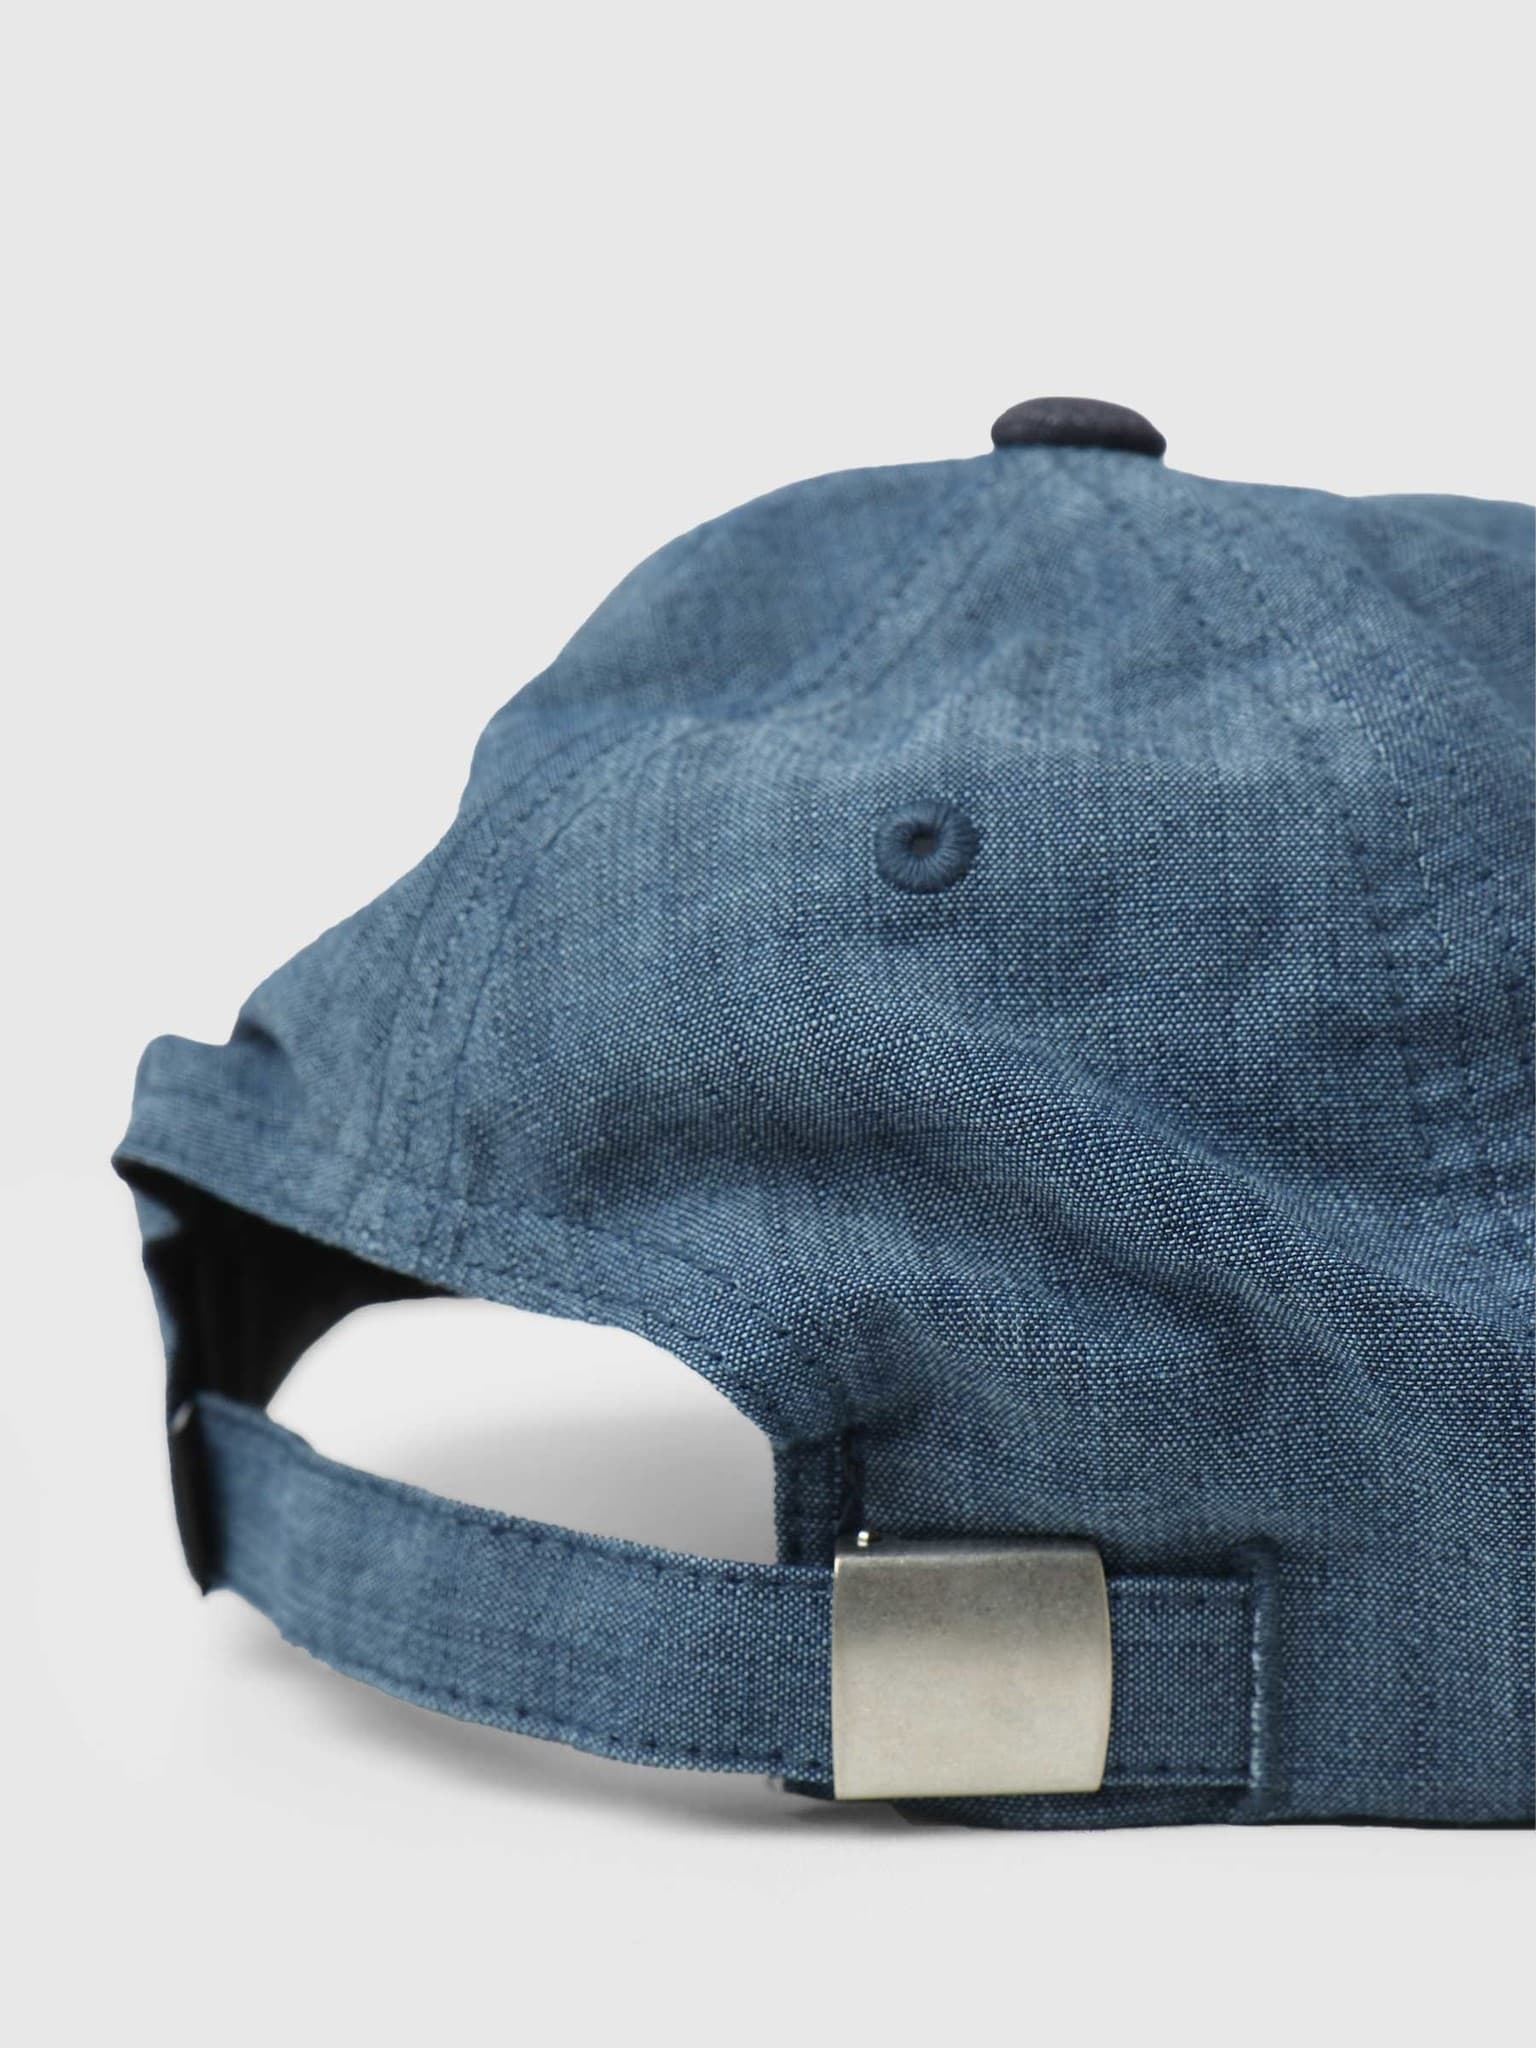 Global Warming 6 Panel Hat Blue Chambray HT00553